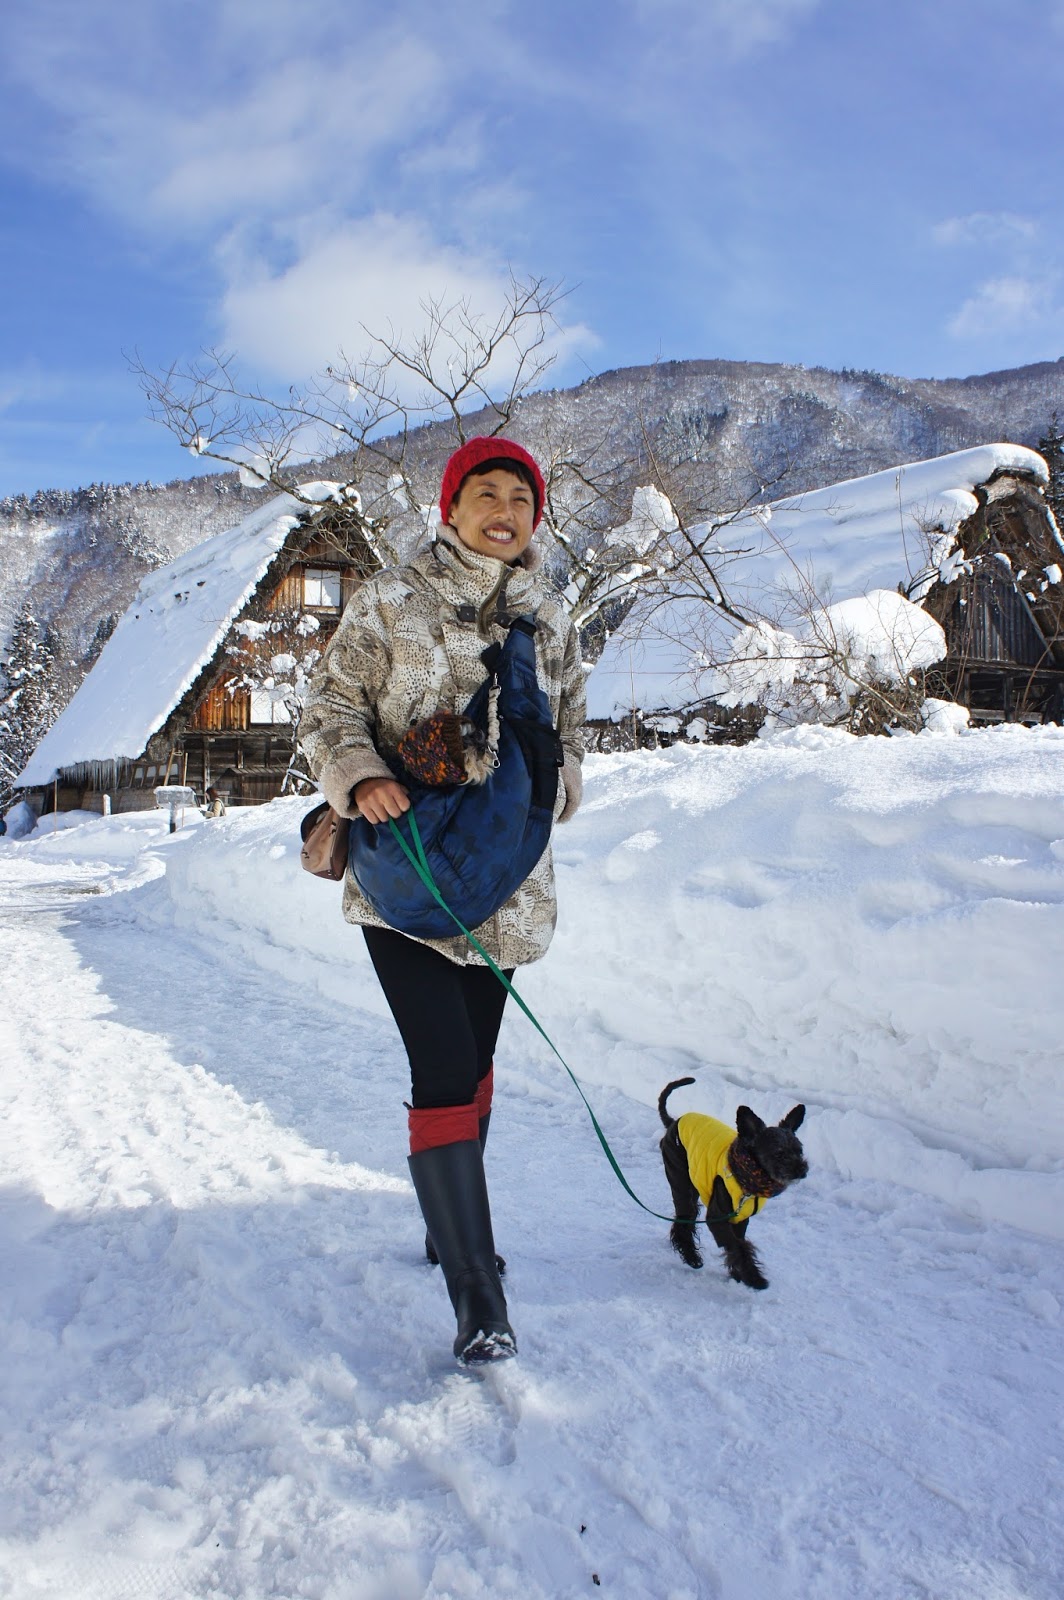 Travel With Small Dogs ちびわんと旅しよう 犬連れ旅行 冬の世界遺産の白川郷 五箇山の合掌造り集落